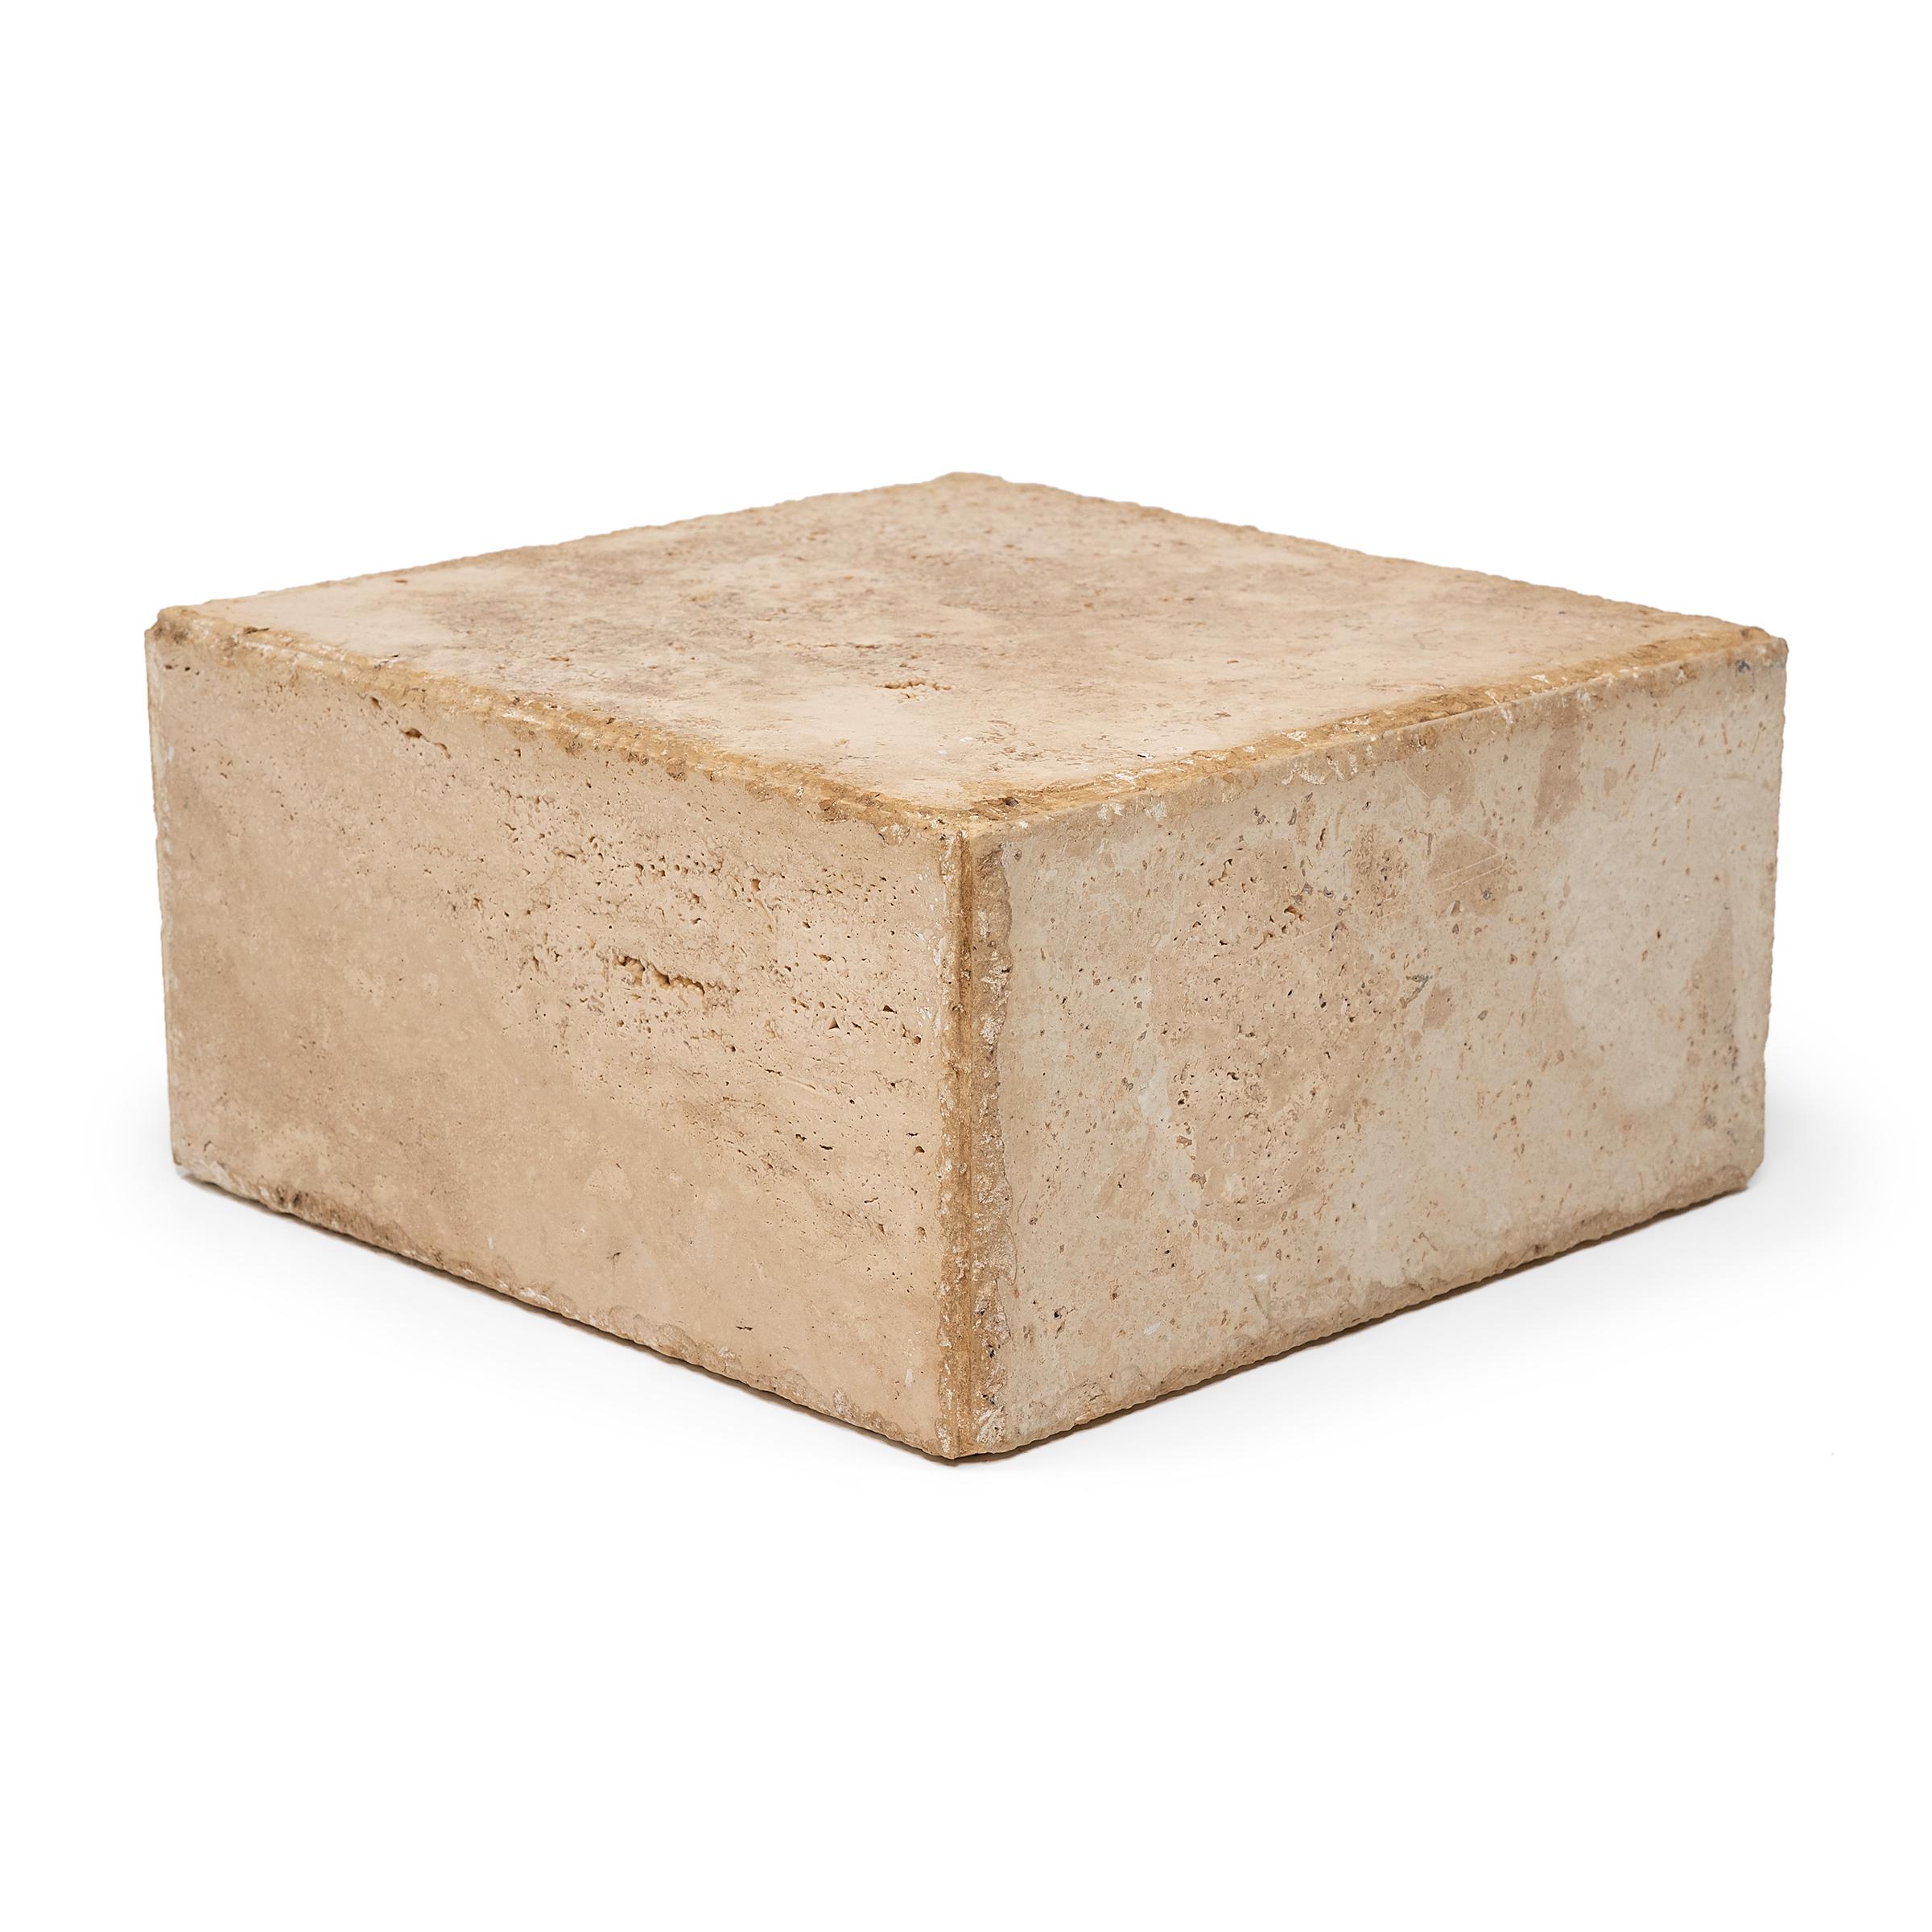 This minimalist block-form pedestal is hand-carved of solid travertine marble by a local Chicago artisan. Shaped with clean lines and balanced proportions, the low display stand exemplifies Organic Modern style with chiseled edges, smoothed sides